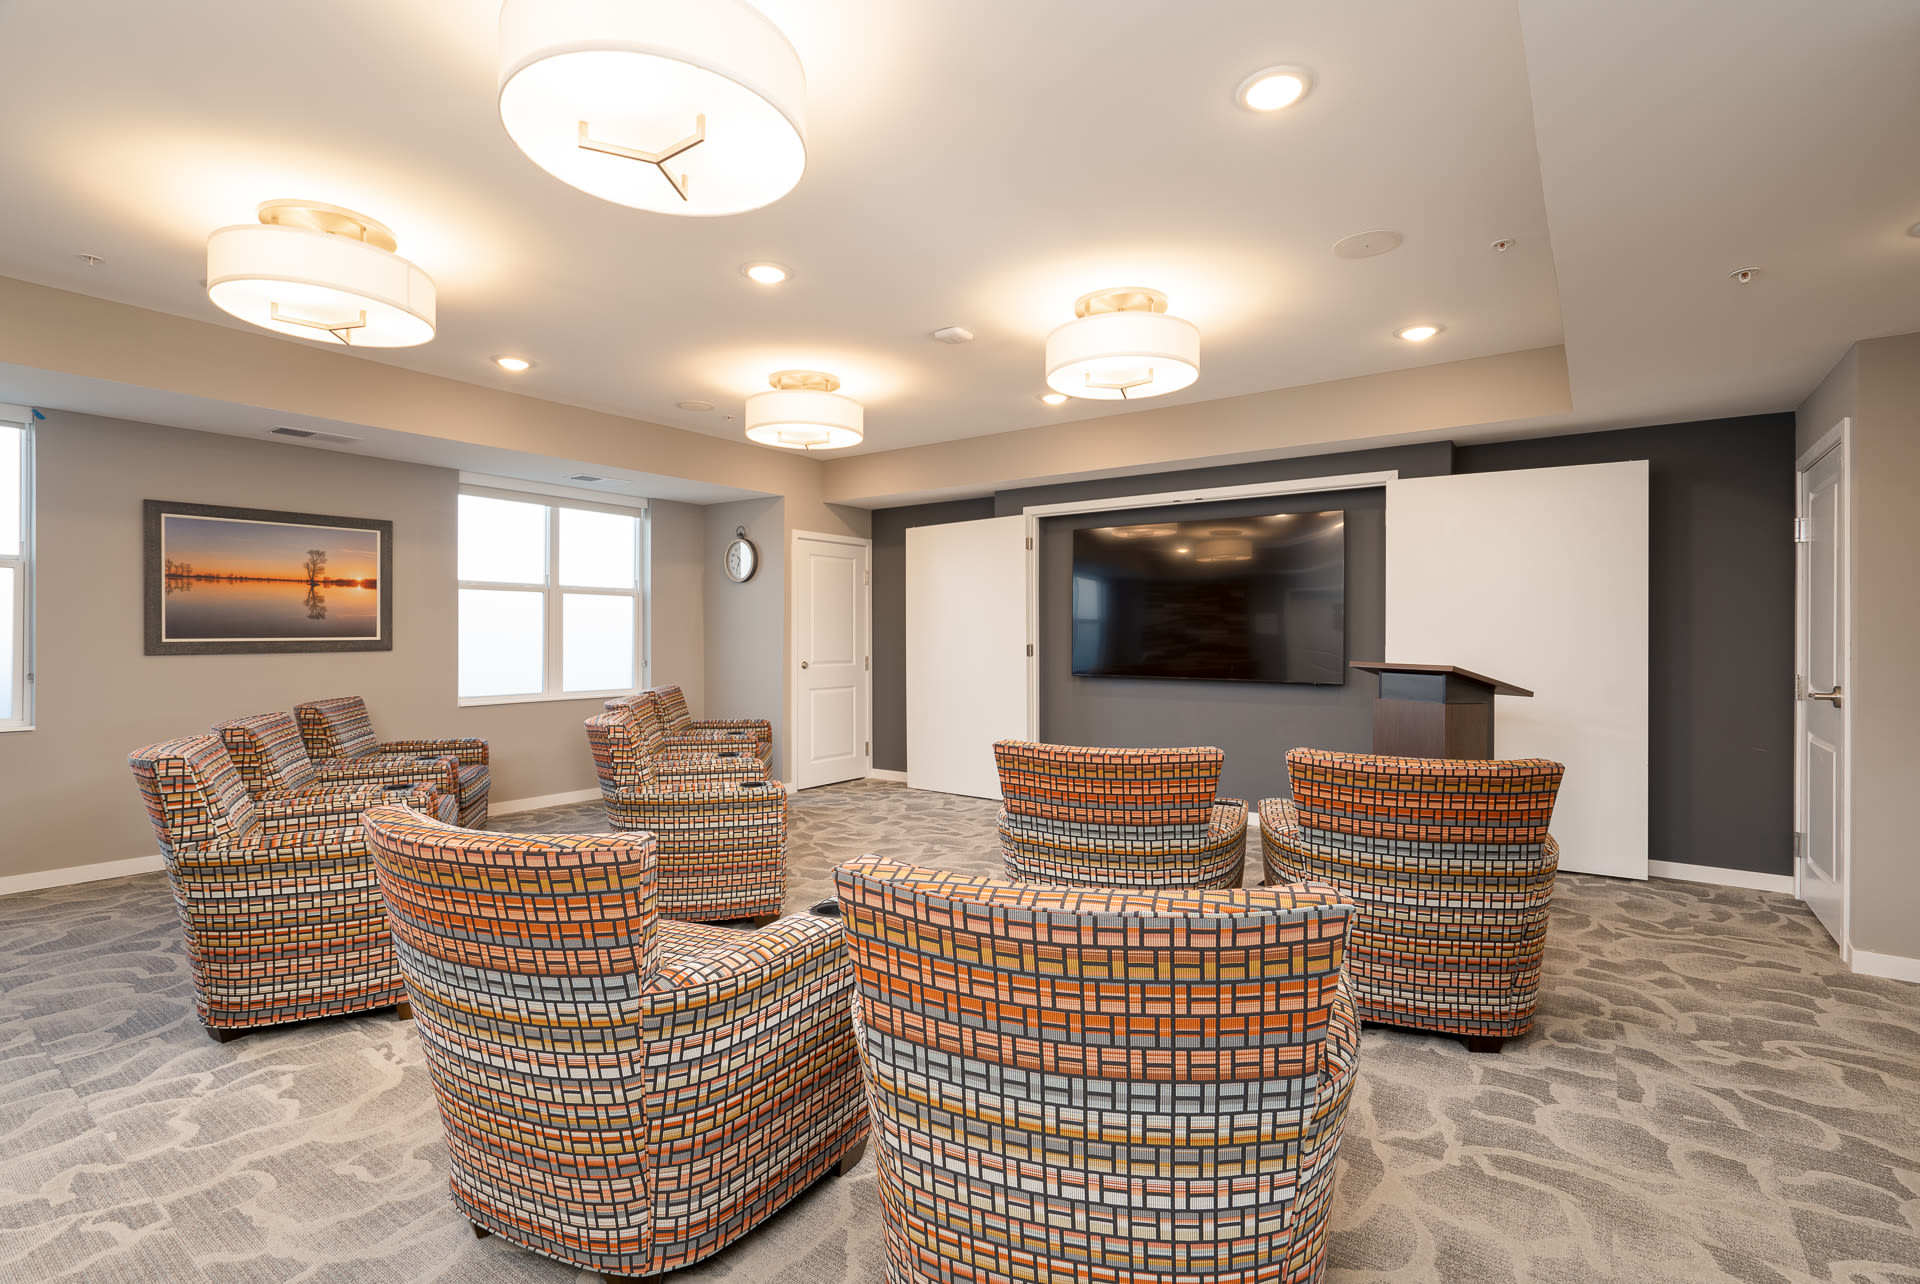 Enjoy the lounge area at our Senior Living Facility in Fridley, Minnesota